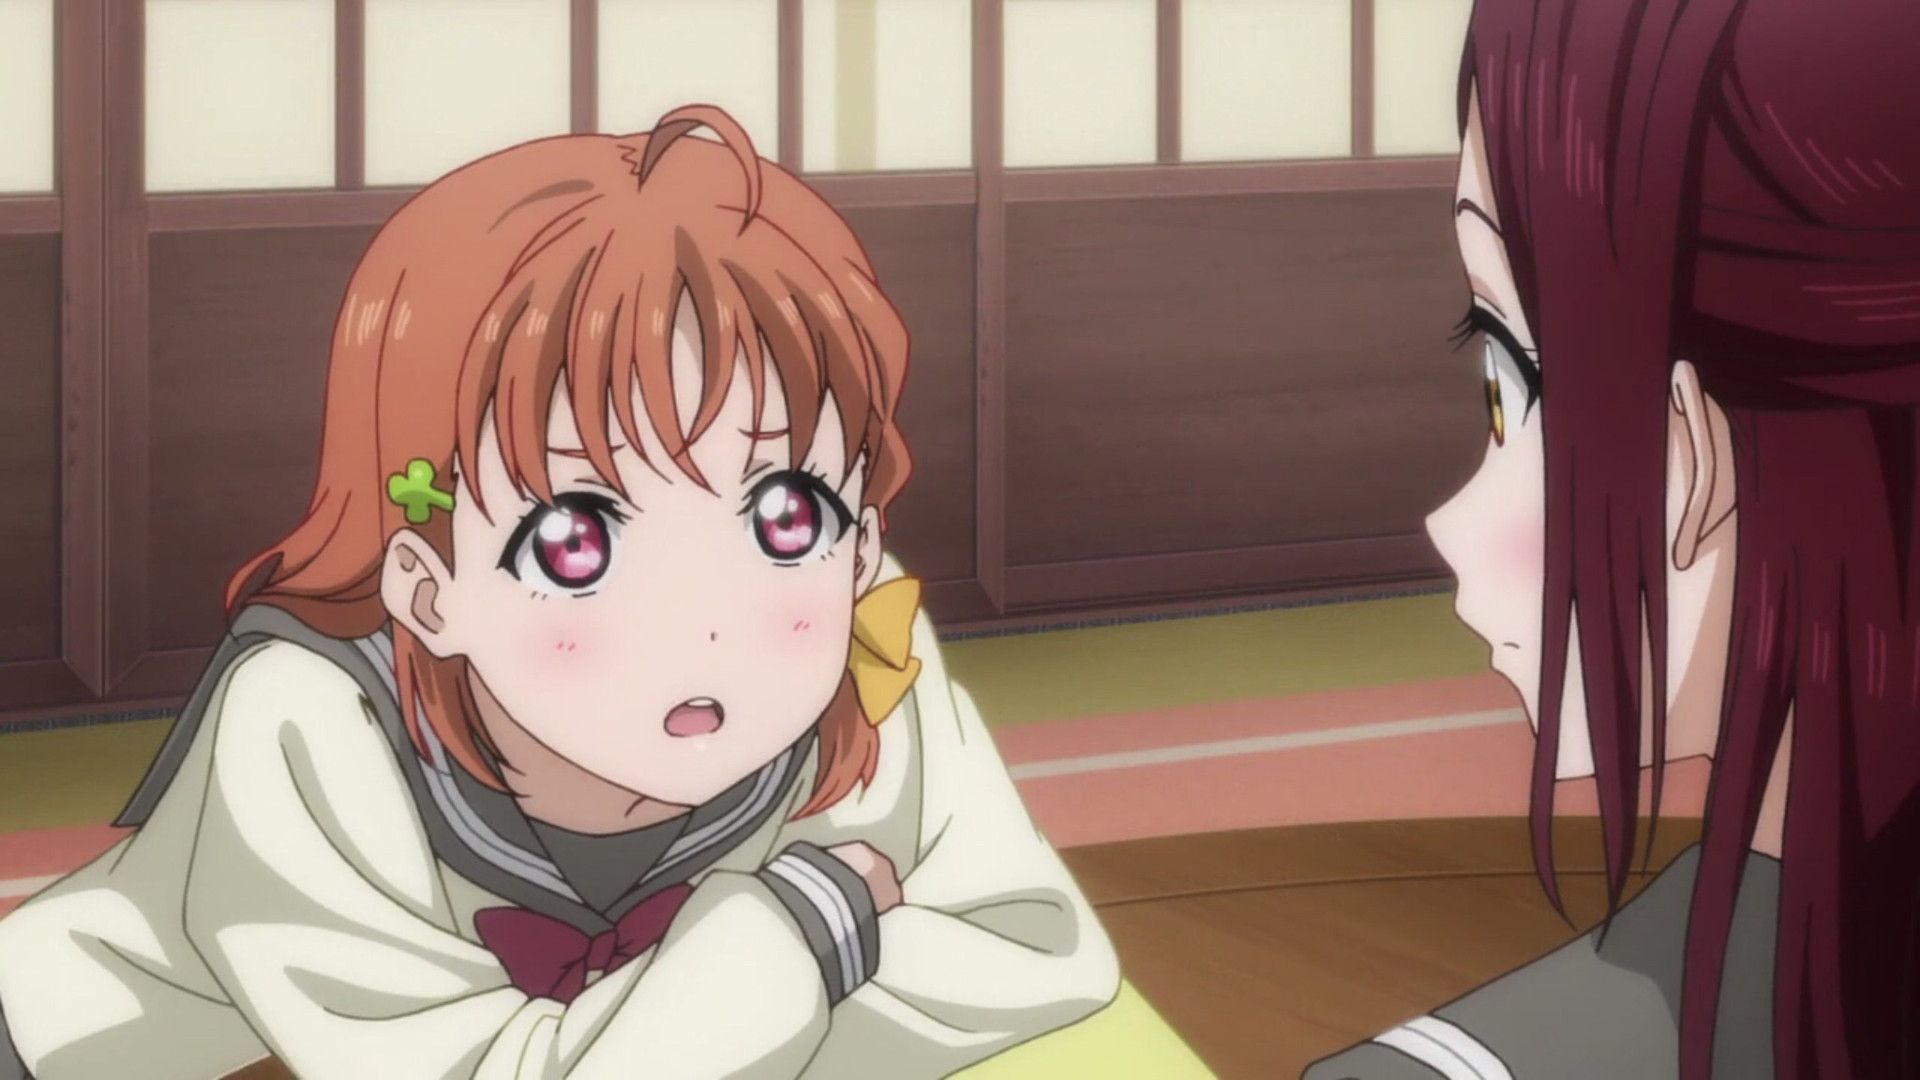 [Image] "love live! Sunshine "1000 songs she bend was its cute scene image competitions wwwwwwwwww 53